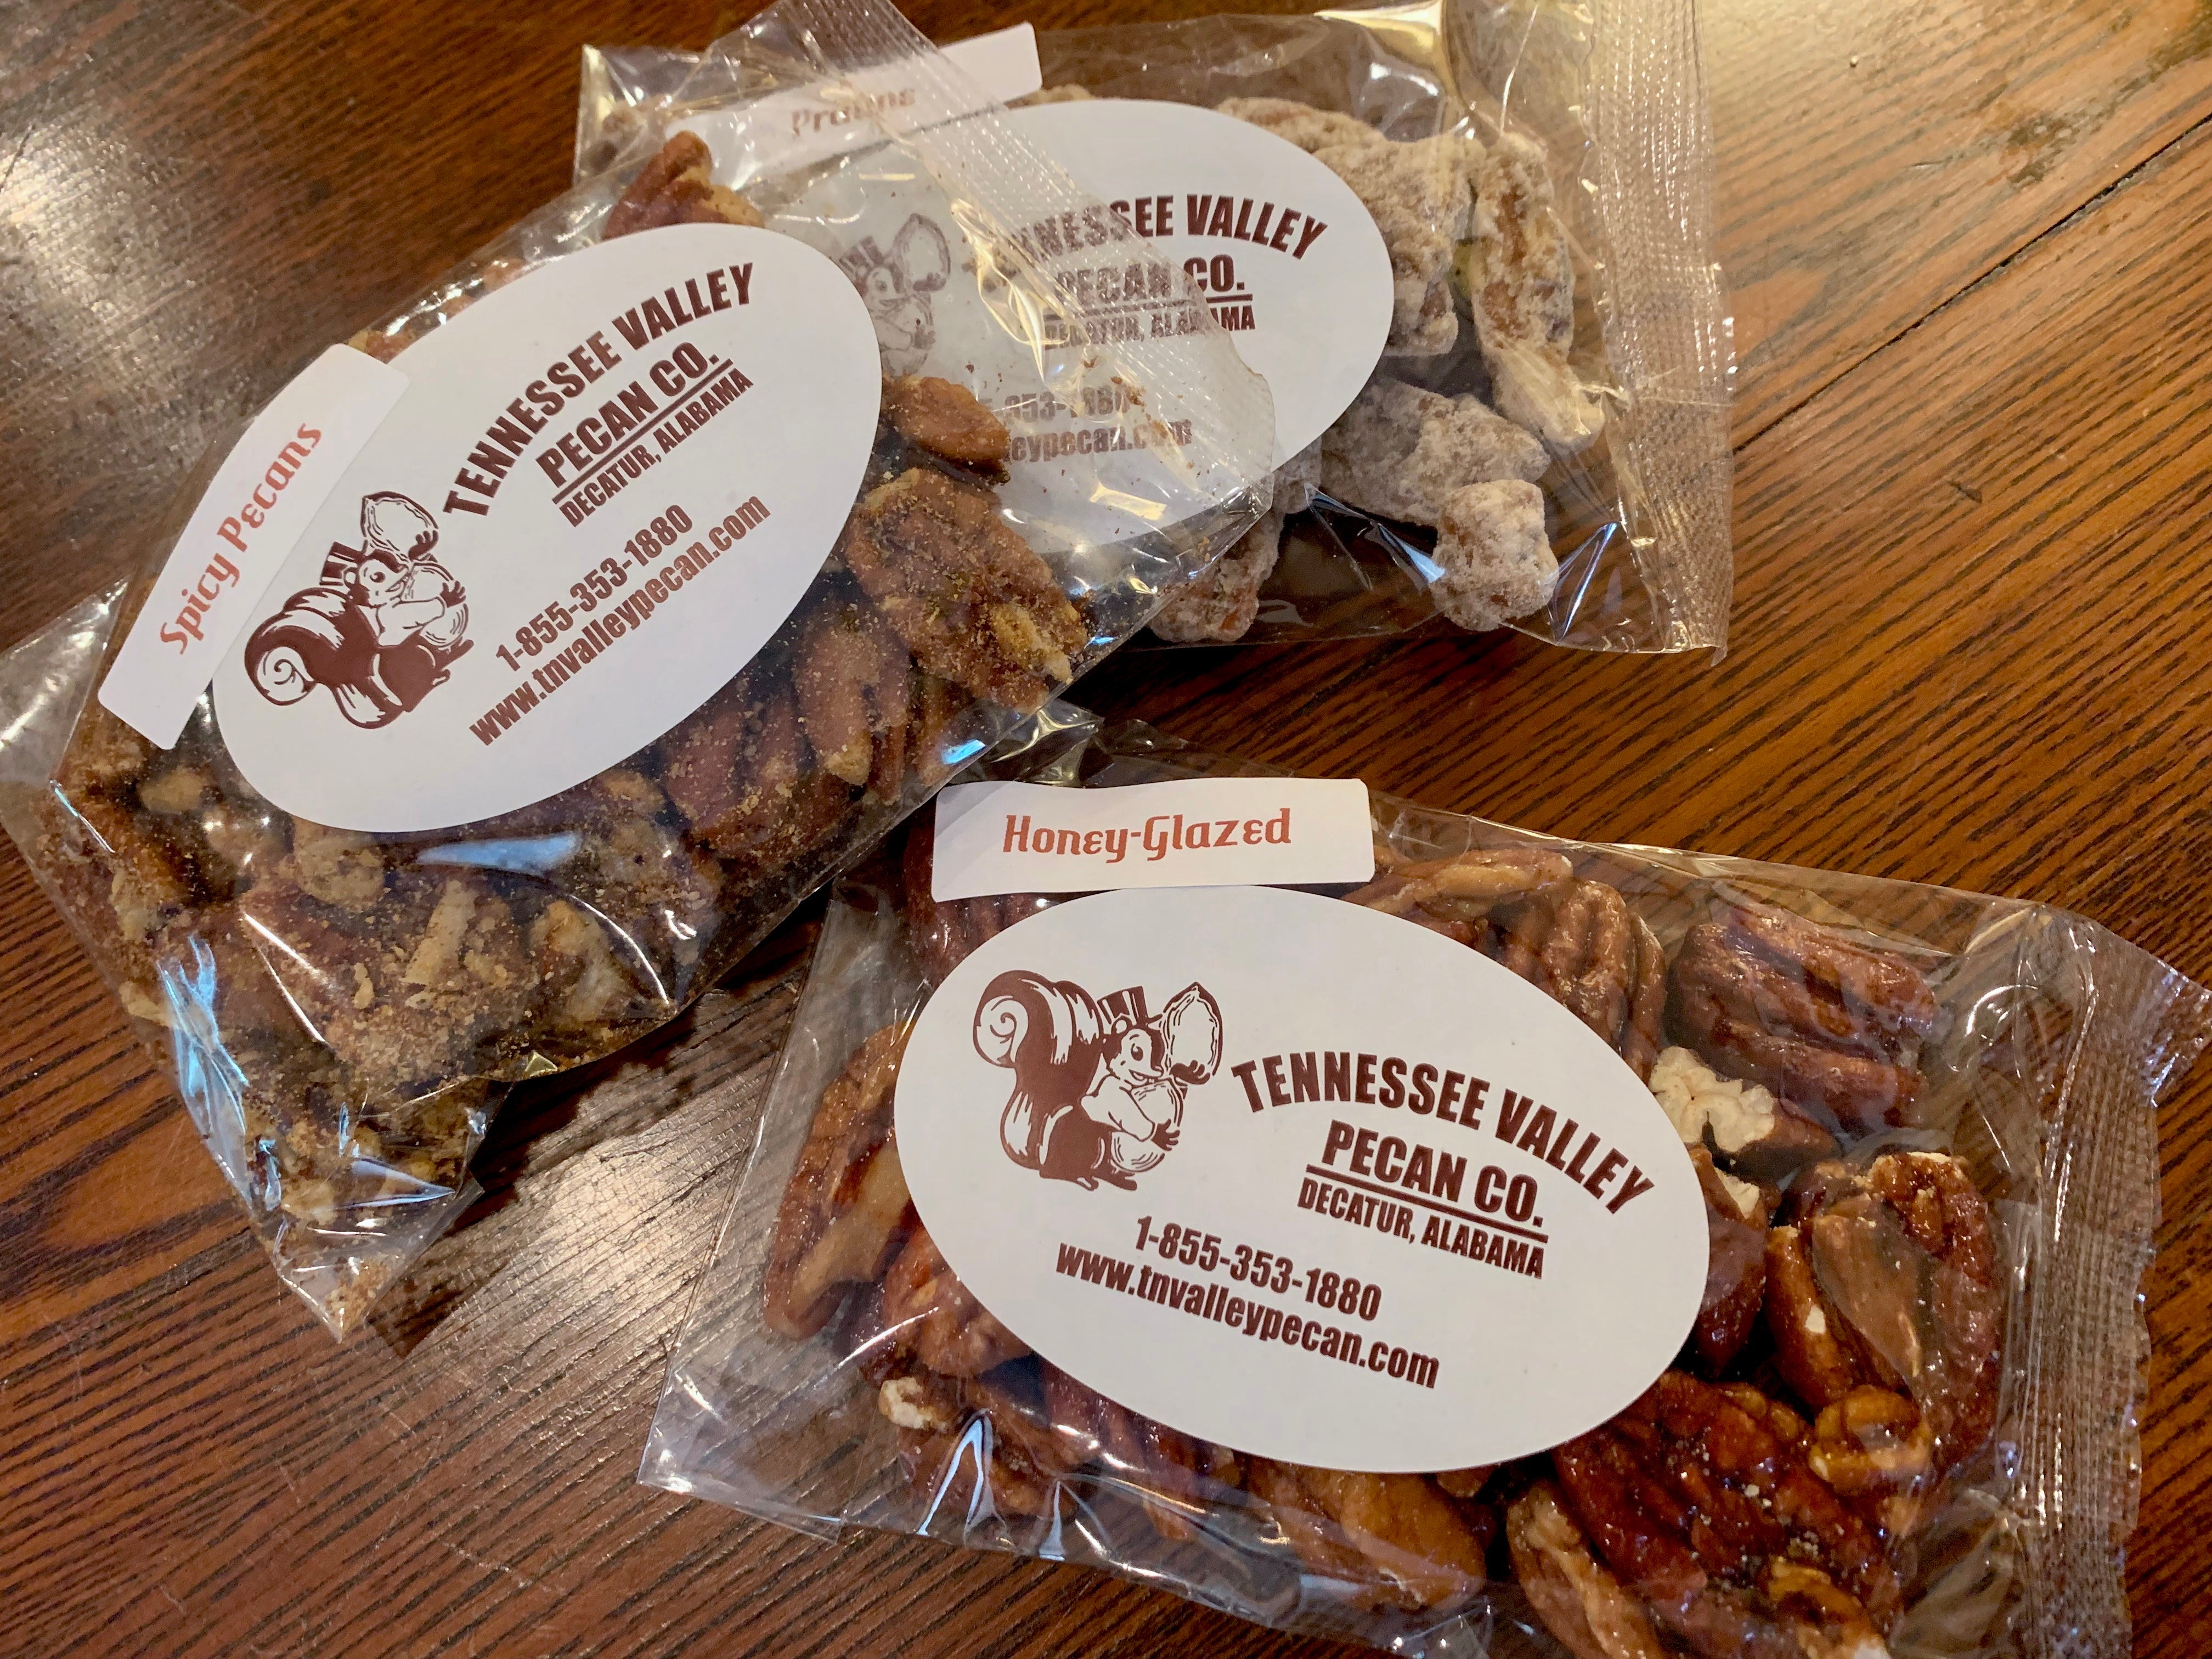 Products: Pecans